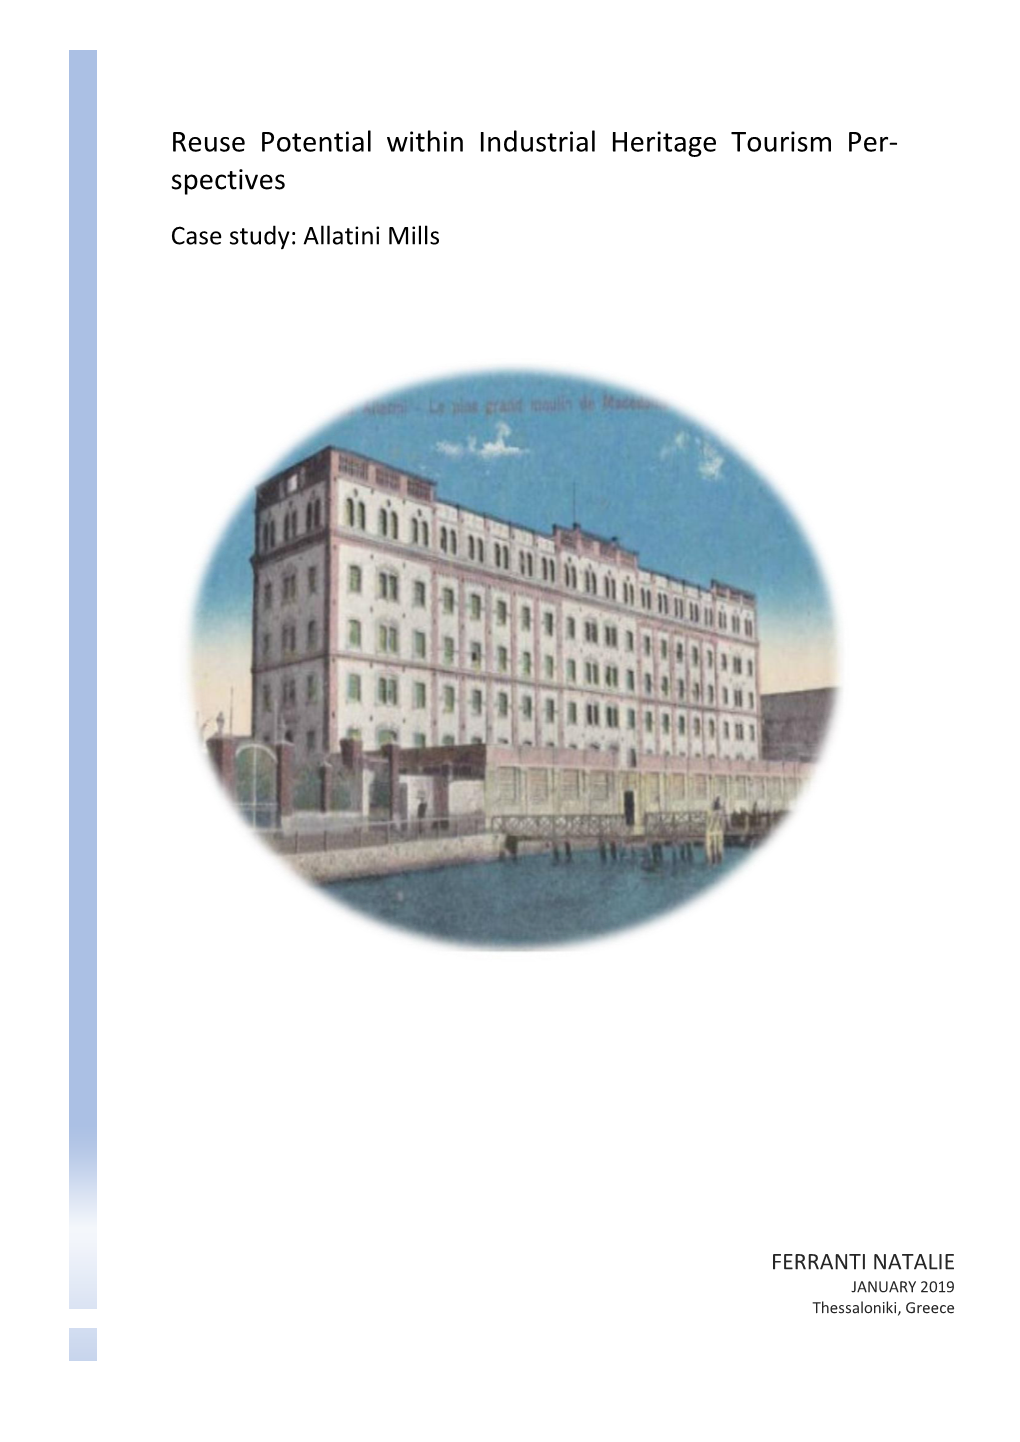 Reuse Potential Within Industrial Heritage Tourism Per- Spectives Case Study: Allatini Mills